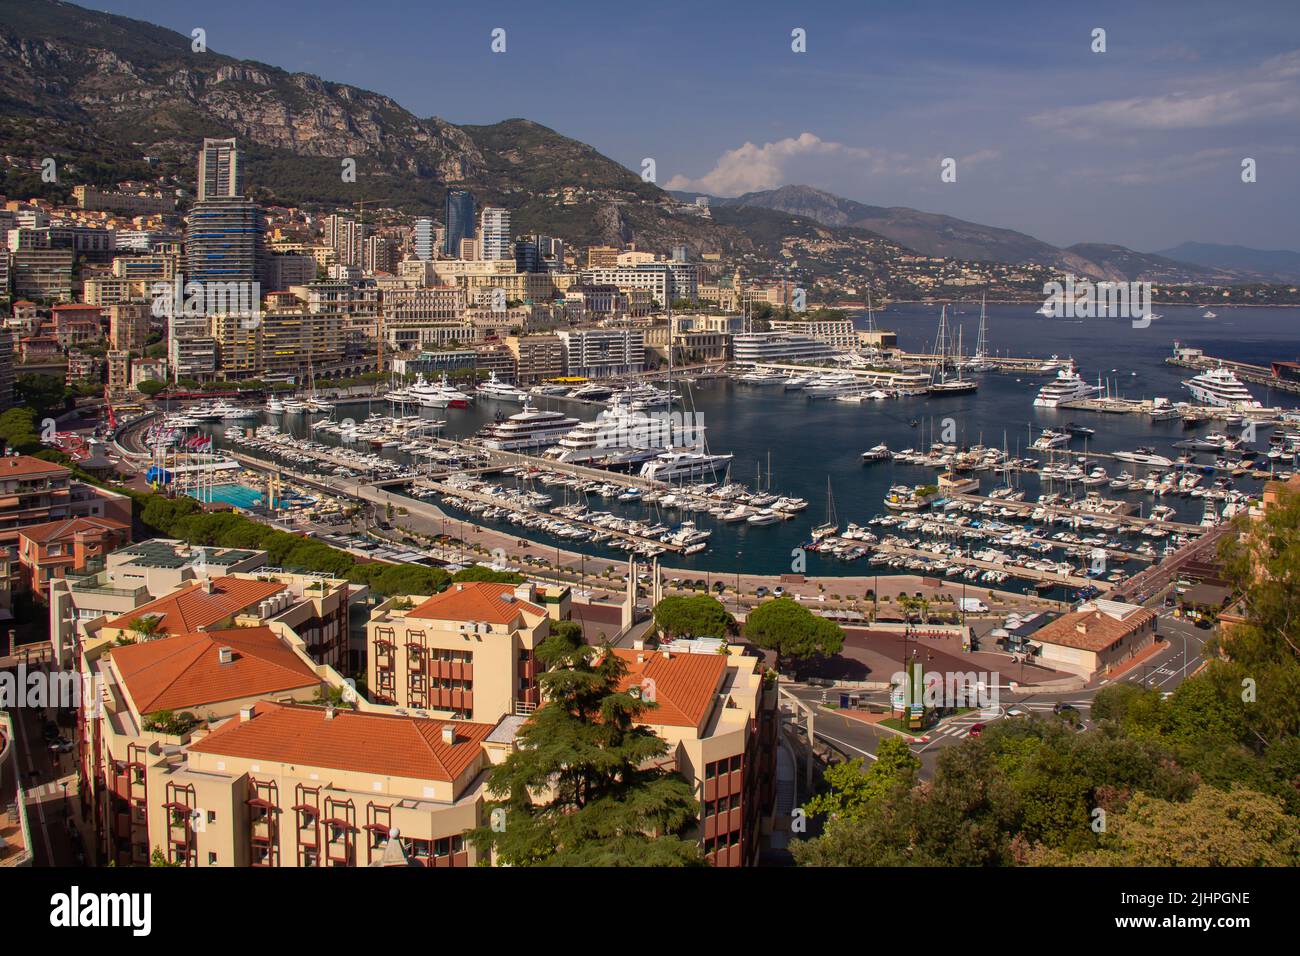 Panoramic aerial view of Monaco and Port Hercule, sweeping views of the city, mountains and harbor, luxury yachts and apartments in La Condamine Stock Photo